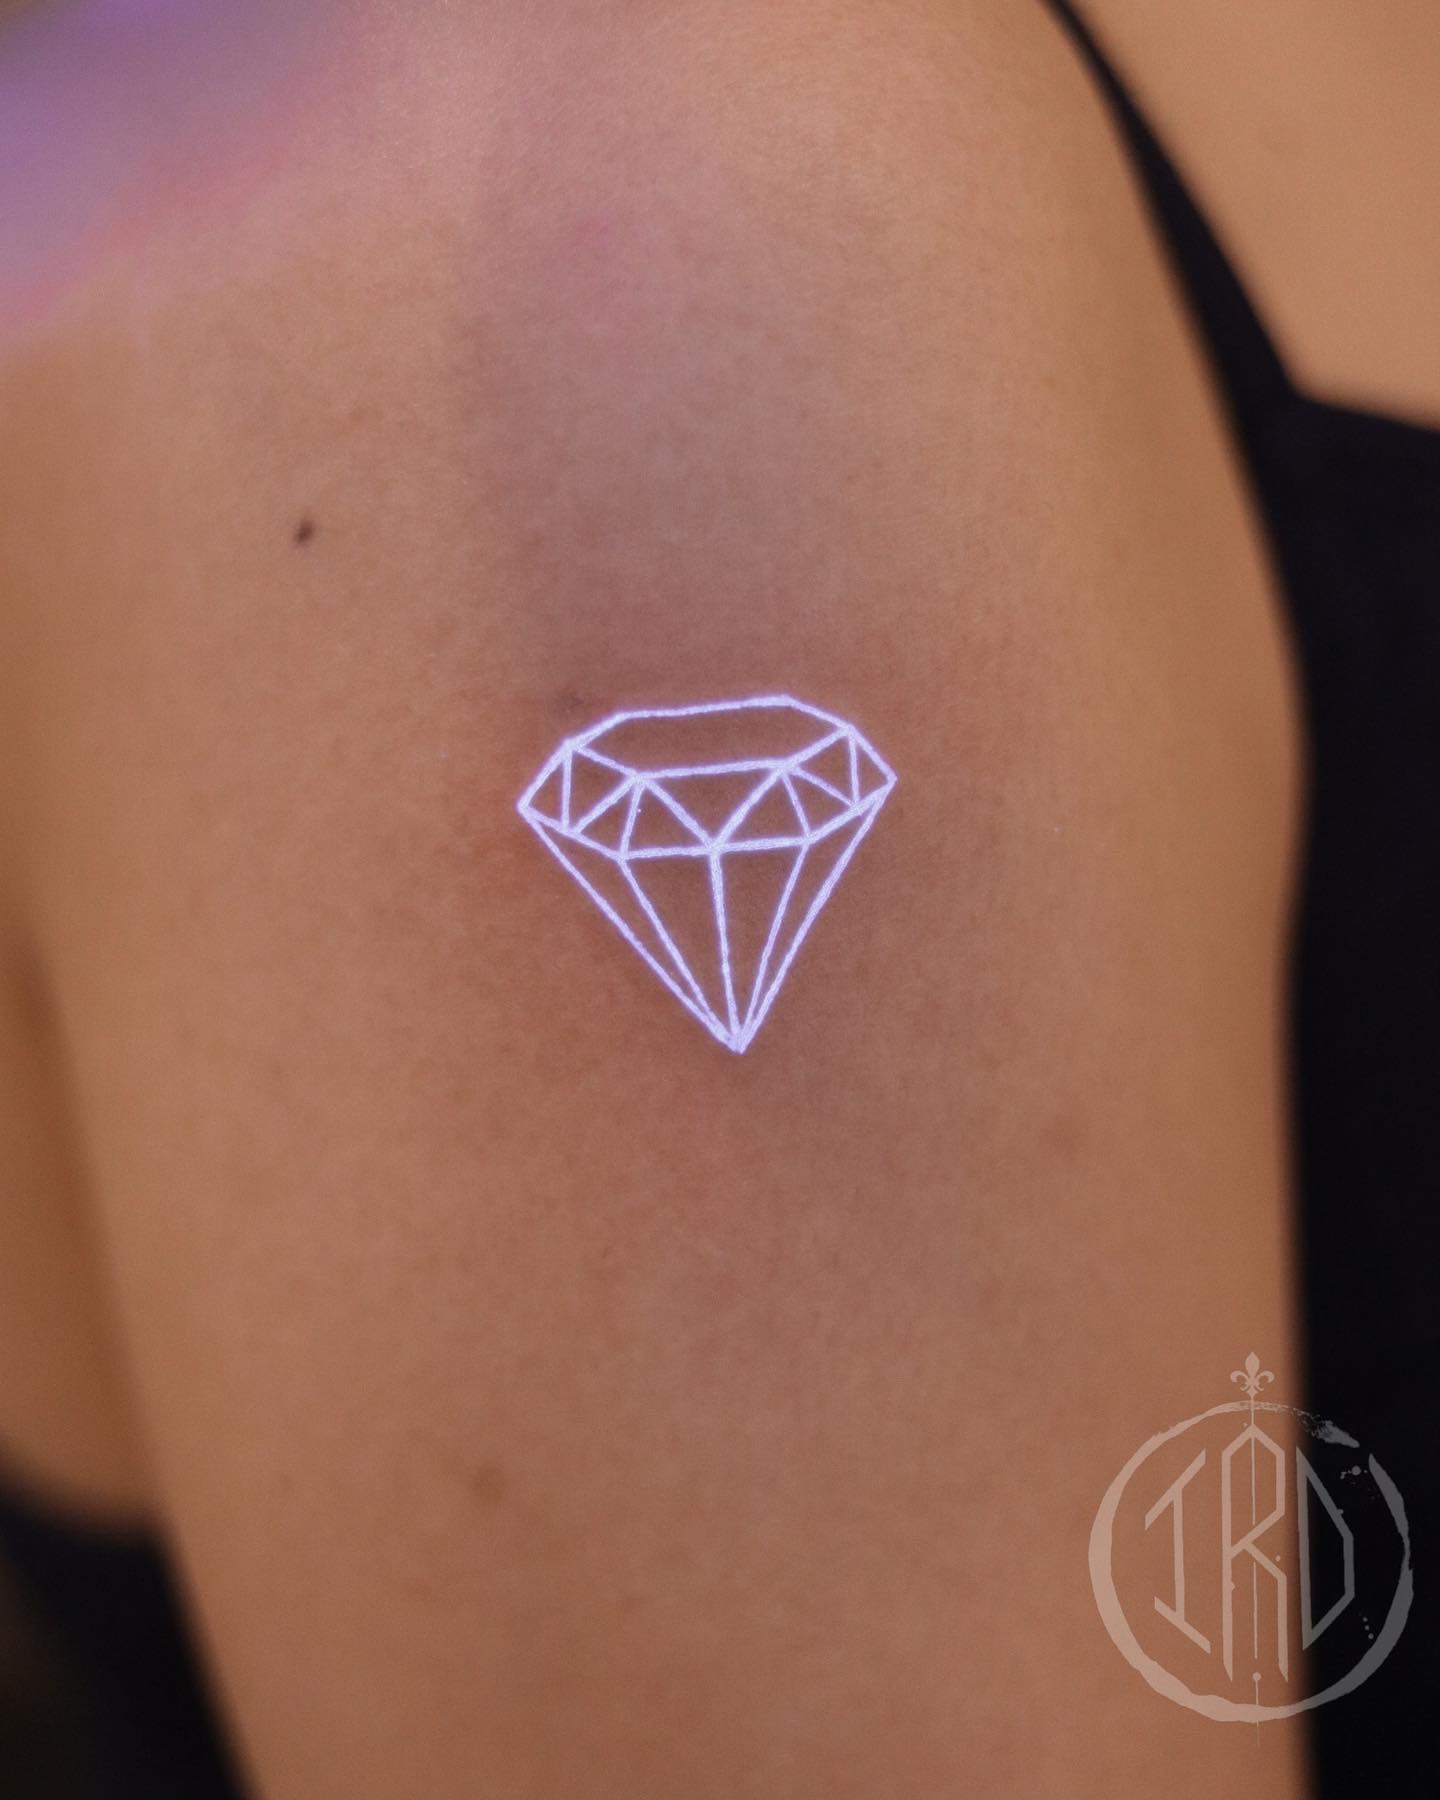 The white ink diamond tattoo looks like it could be a small diamond or star shape. The point of this tattoo is to put the focus on your skin and how it glows. The white ink will shine through your skin and create a bright glow.